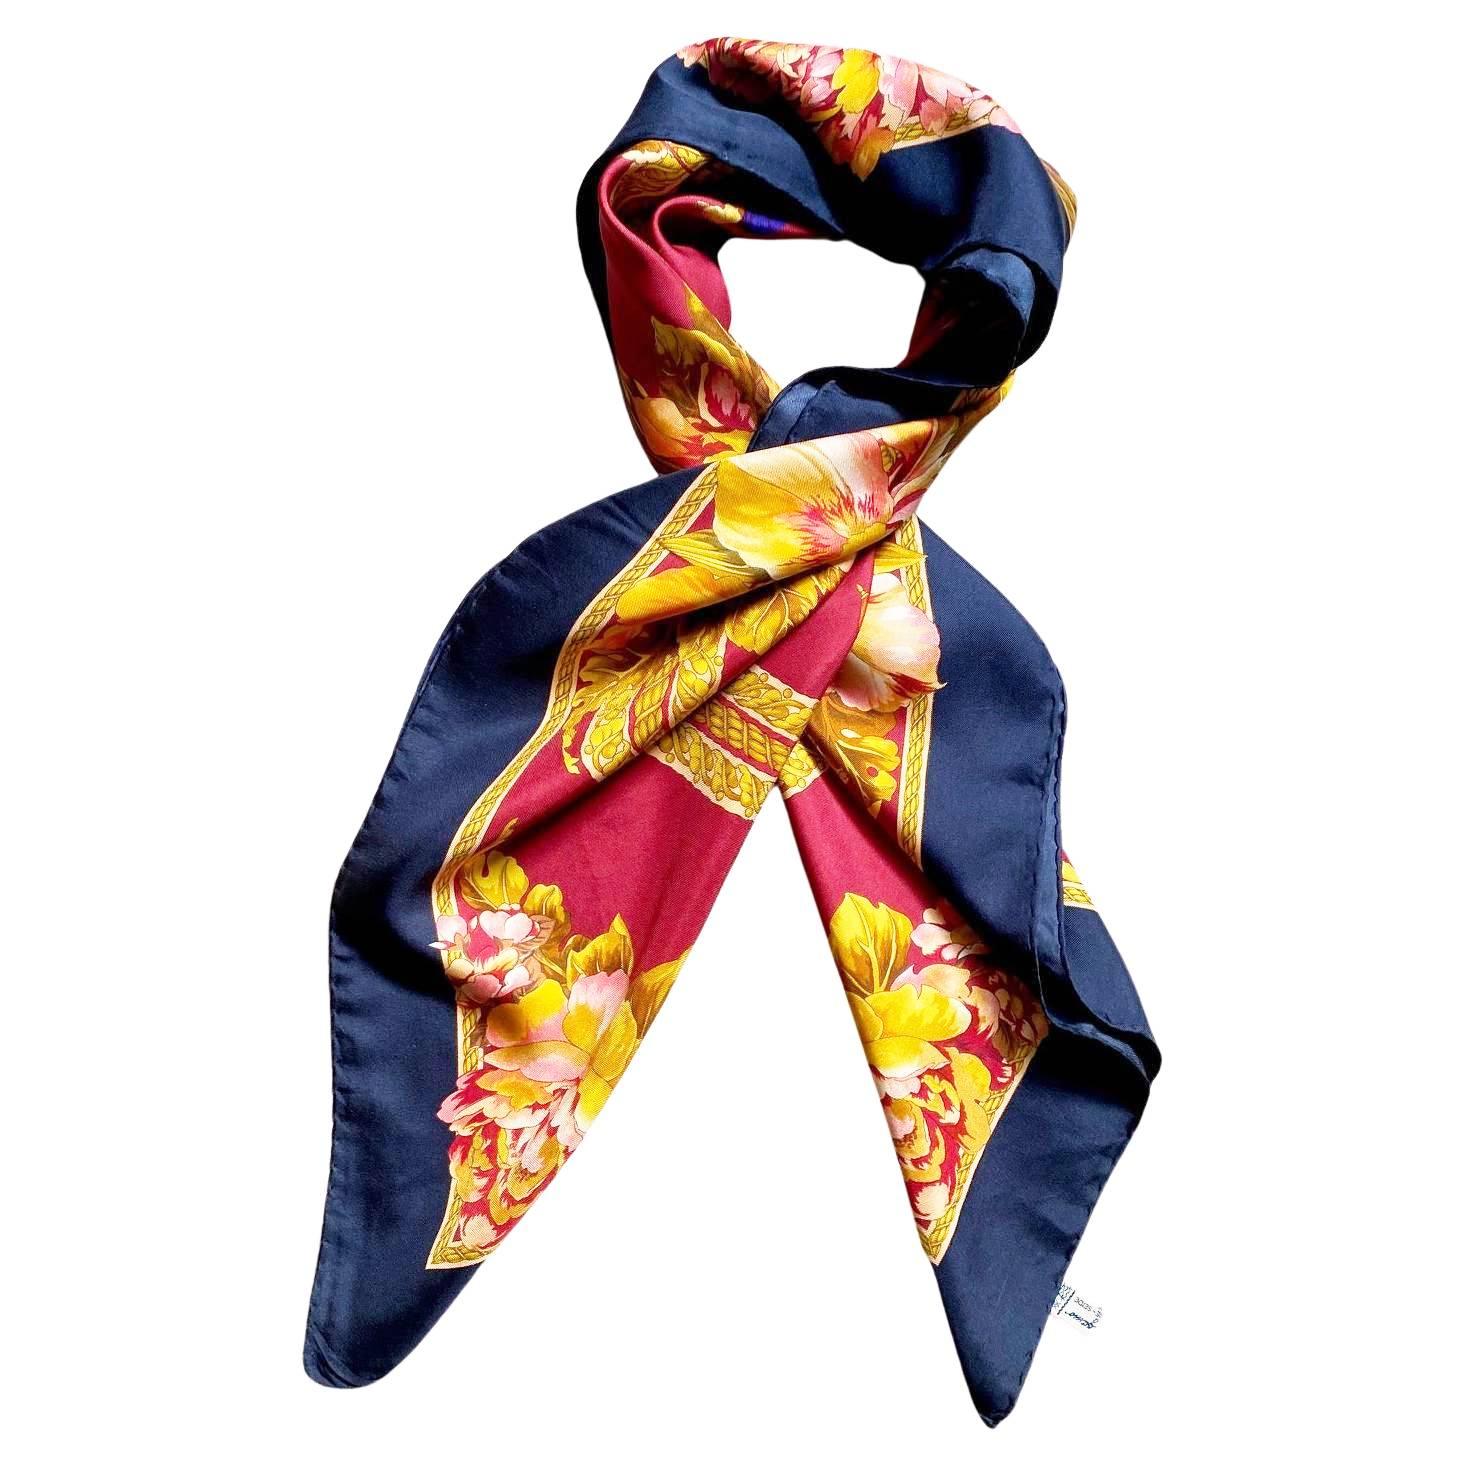 This 1980s Salvatore Ferragamo luxurious silk babushka scarf is the perfect piece to make a statement. The classic Chinese Flying Warrior design, rendered in a deep vibrant hue, will instantly elevate any ensemble. Add a touch of timeless